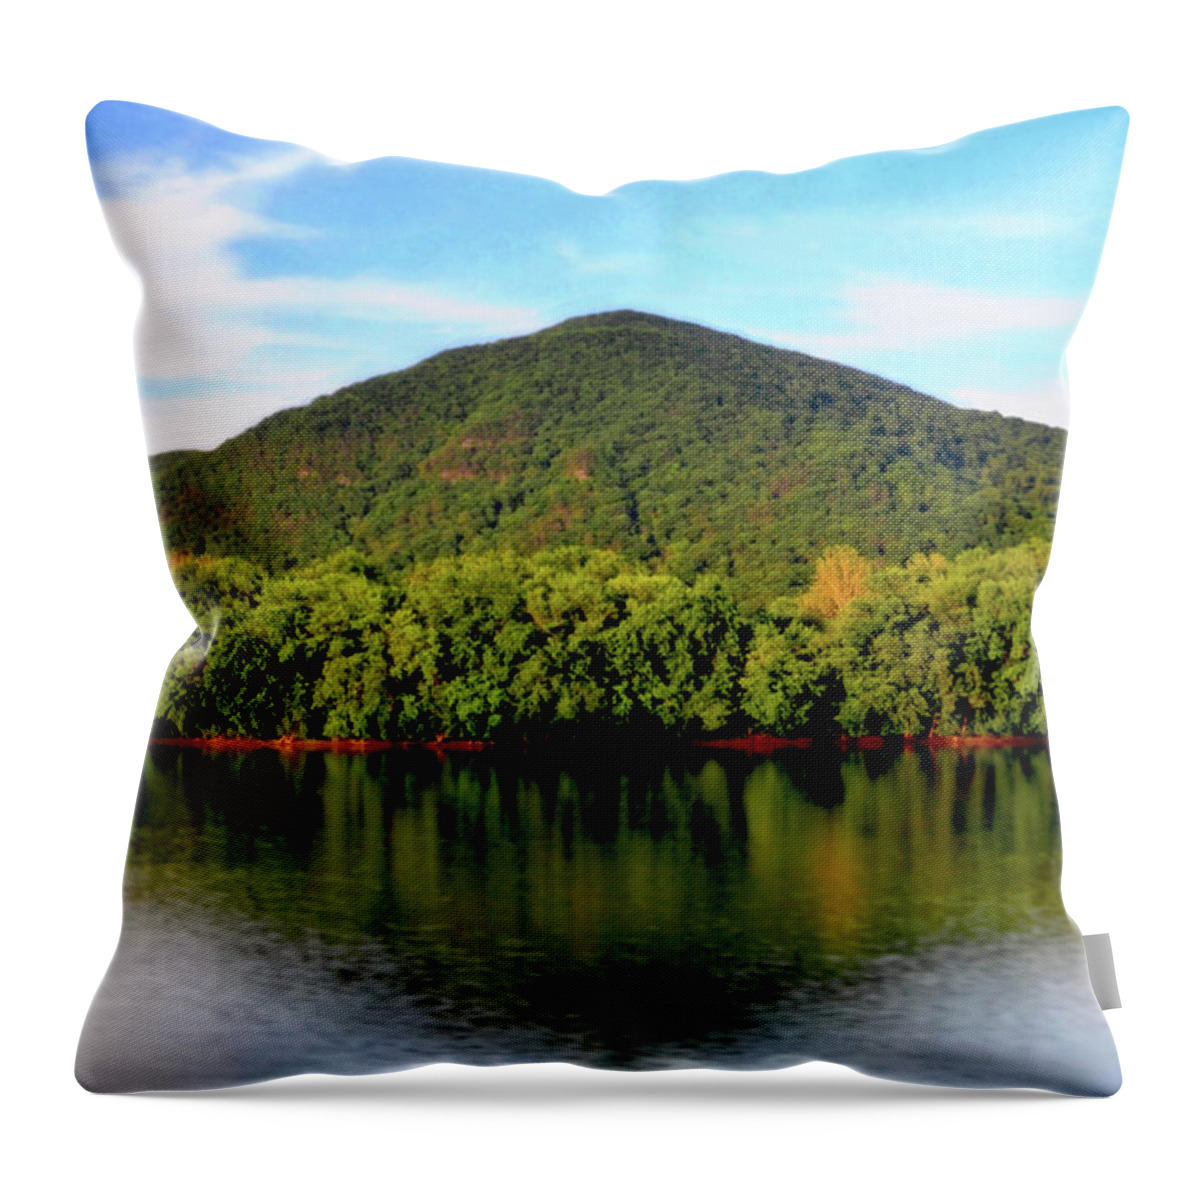 Mountain Throw Pillow featuring the photograph Susquehanna River Reflections 001 by George Bostian